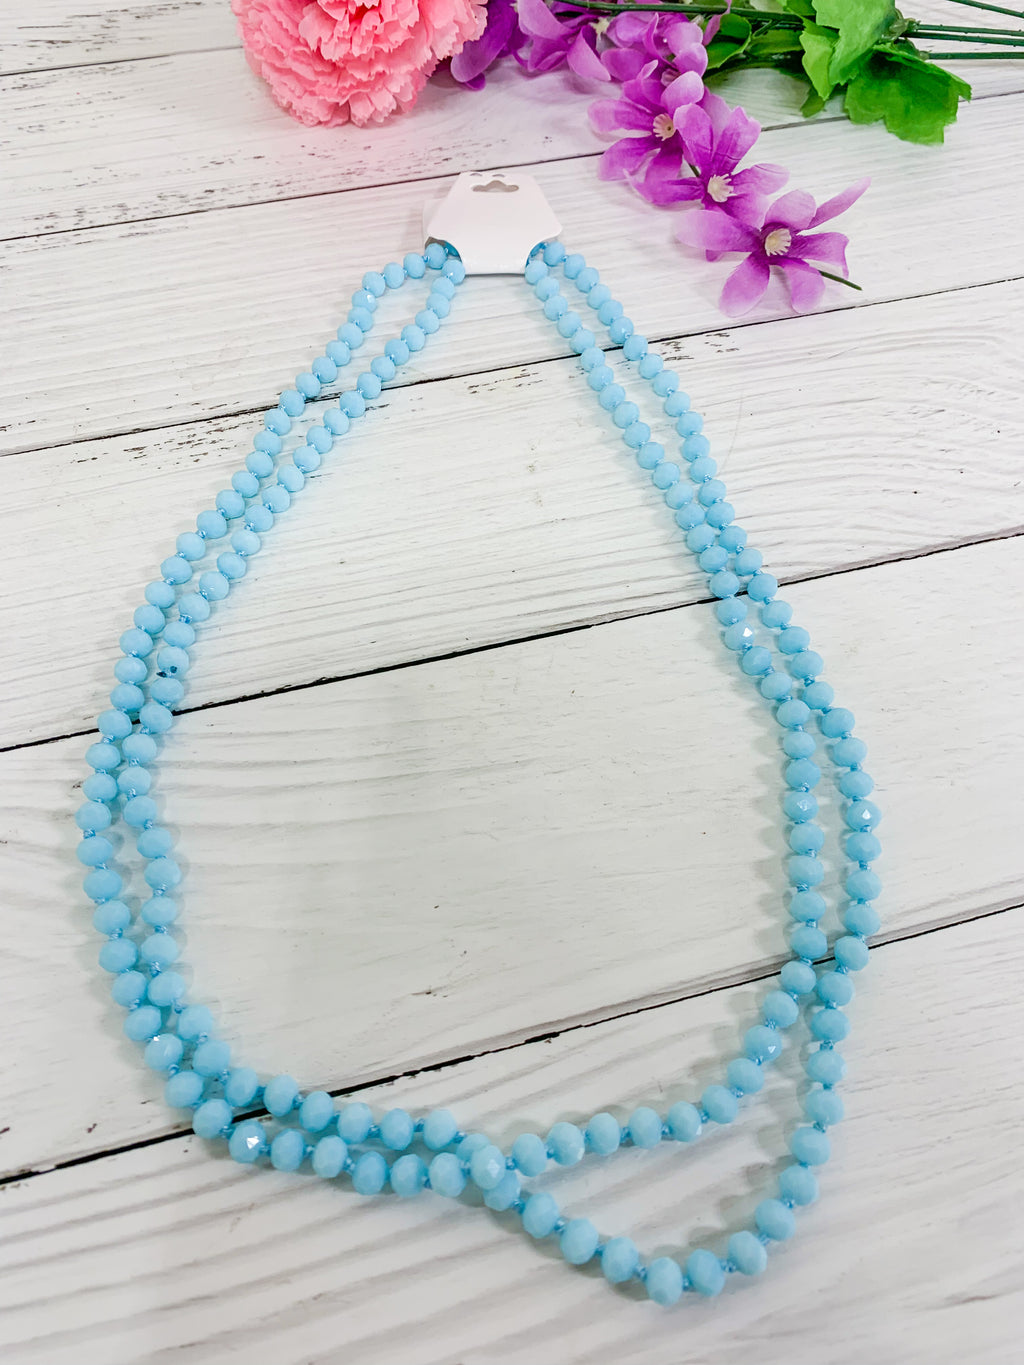 Blue Skies  - Beaded Necklace 60"